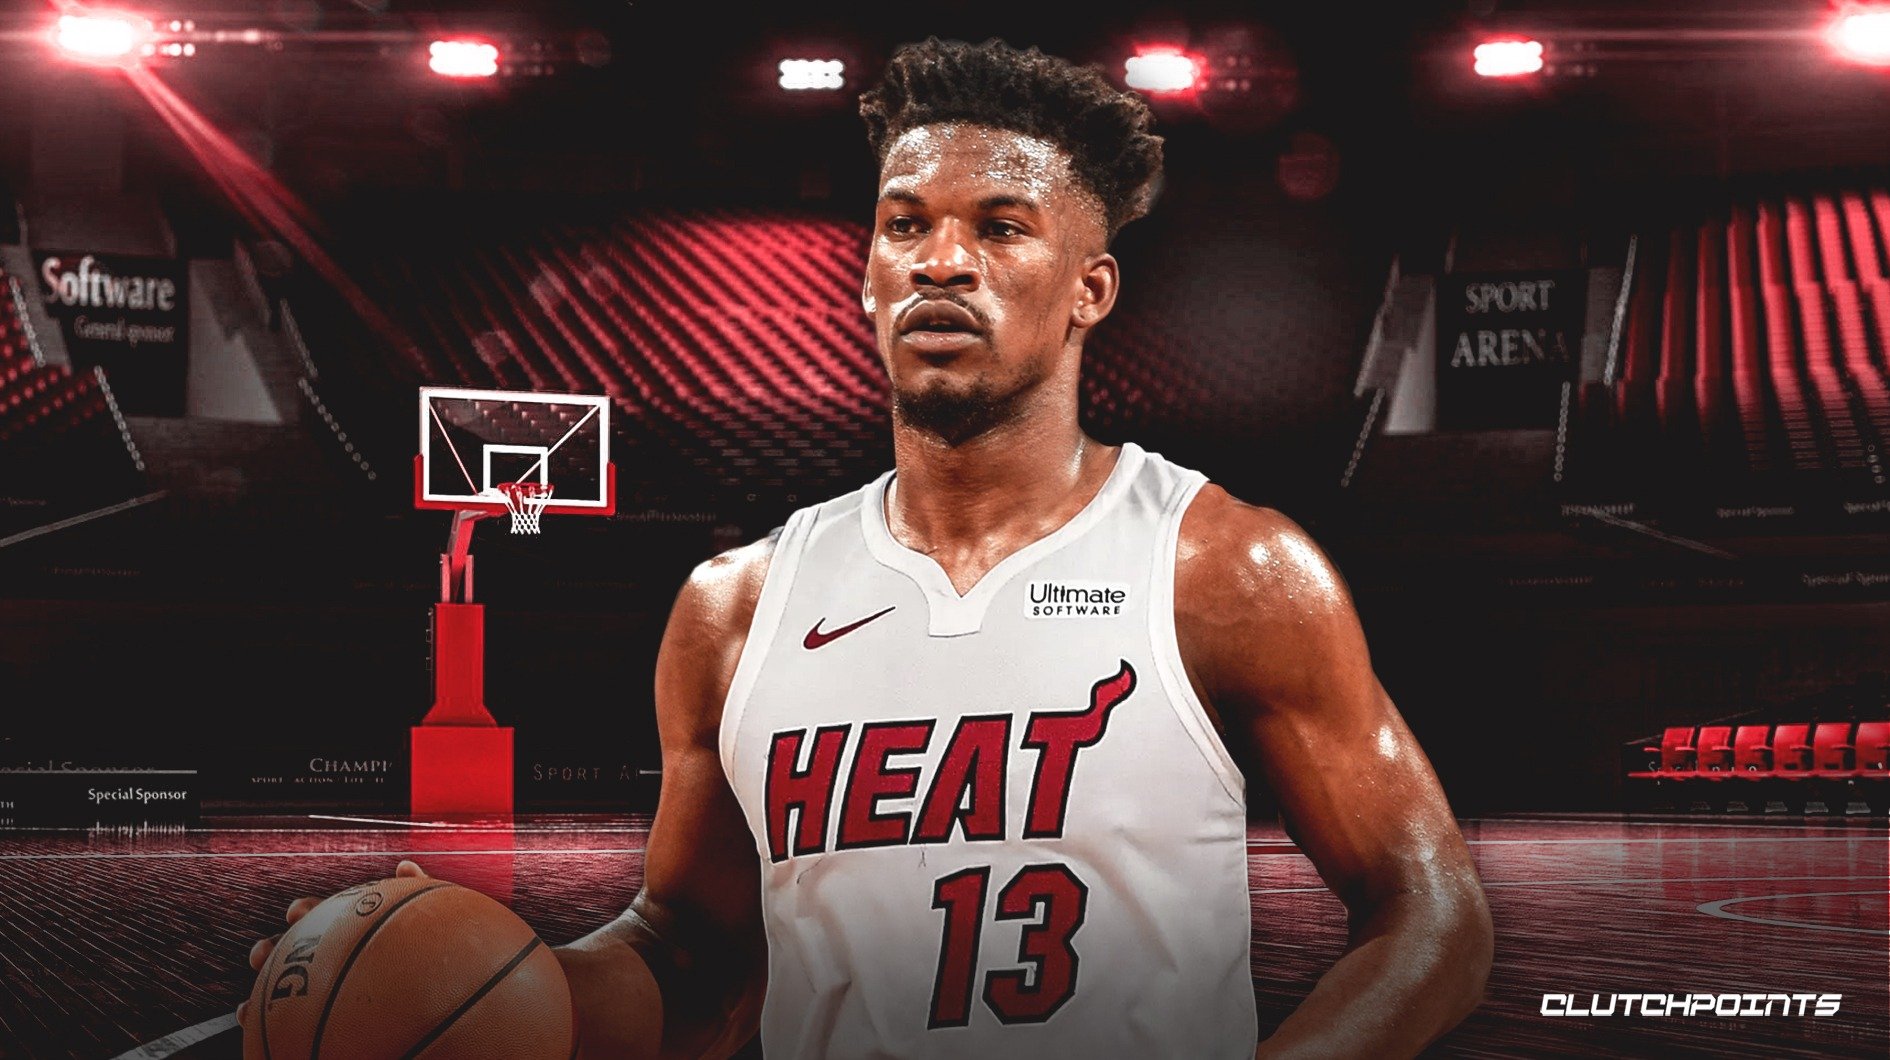 Jimmy butler espn picture